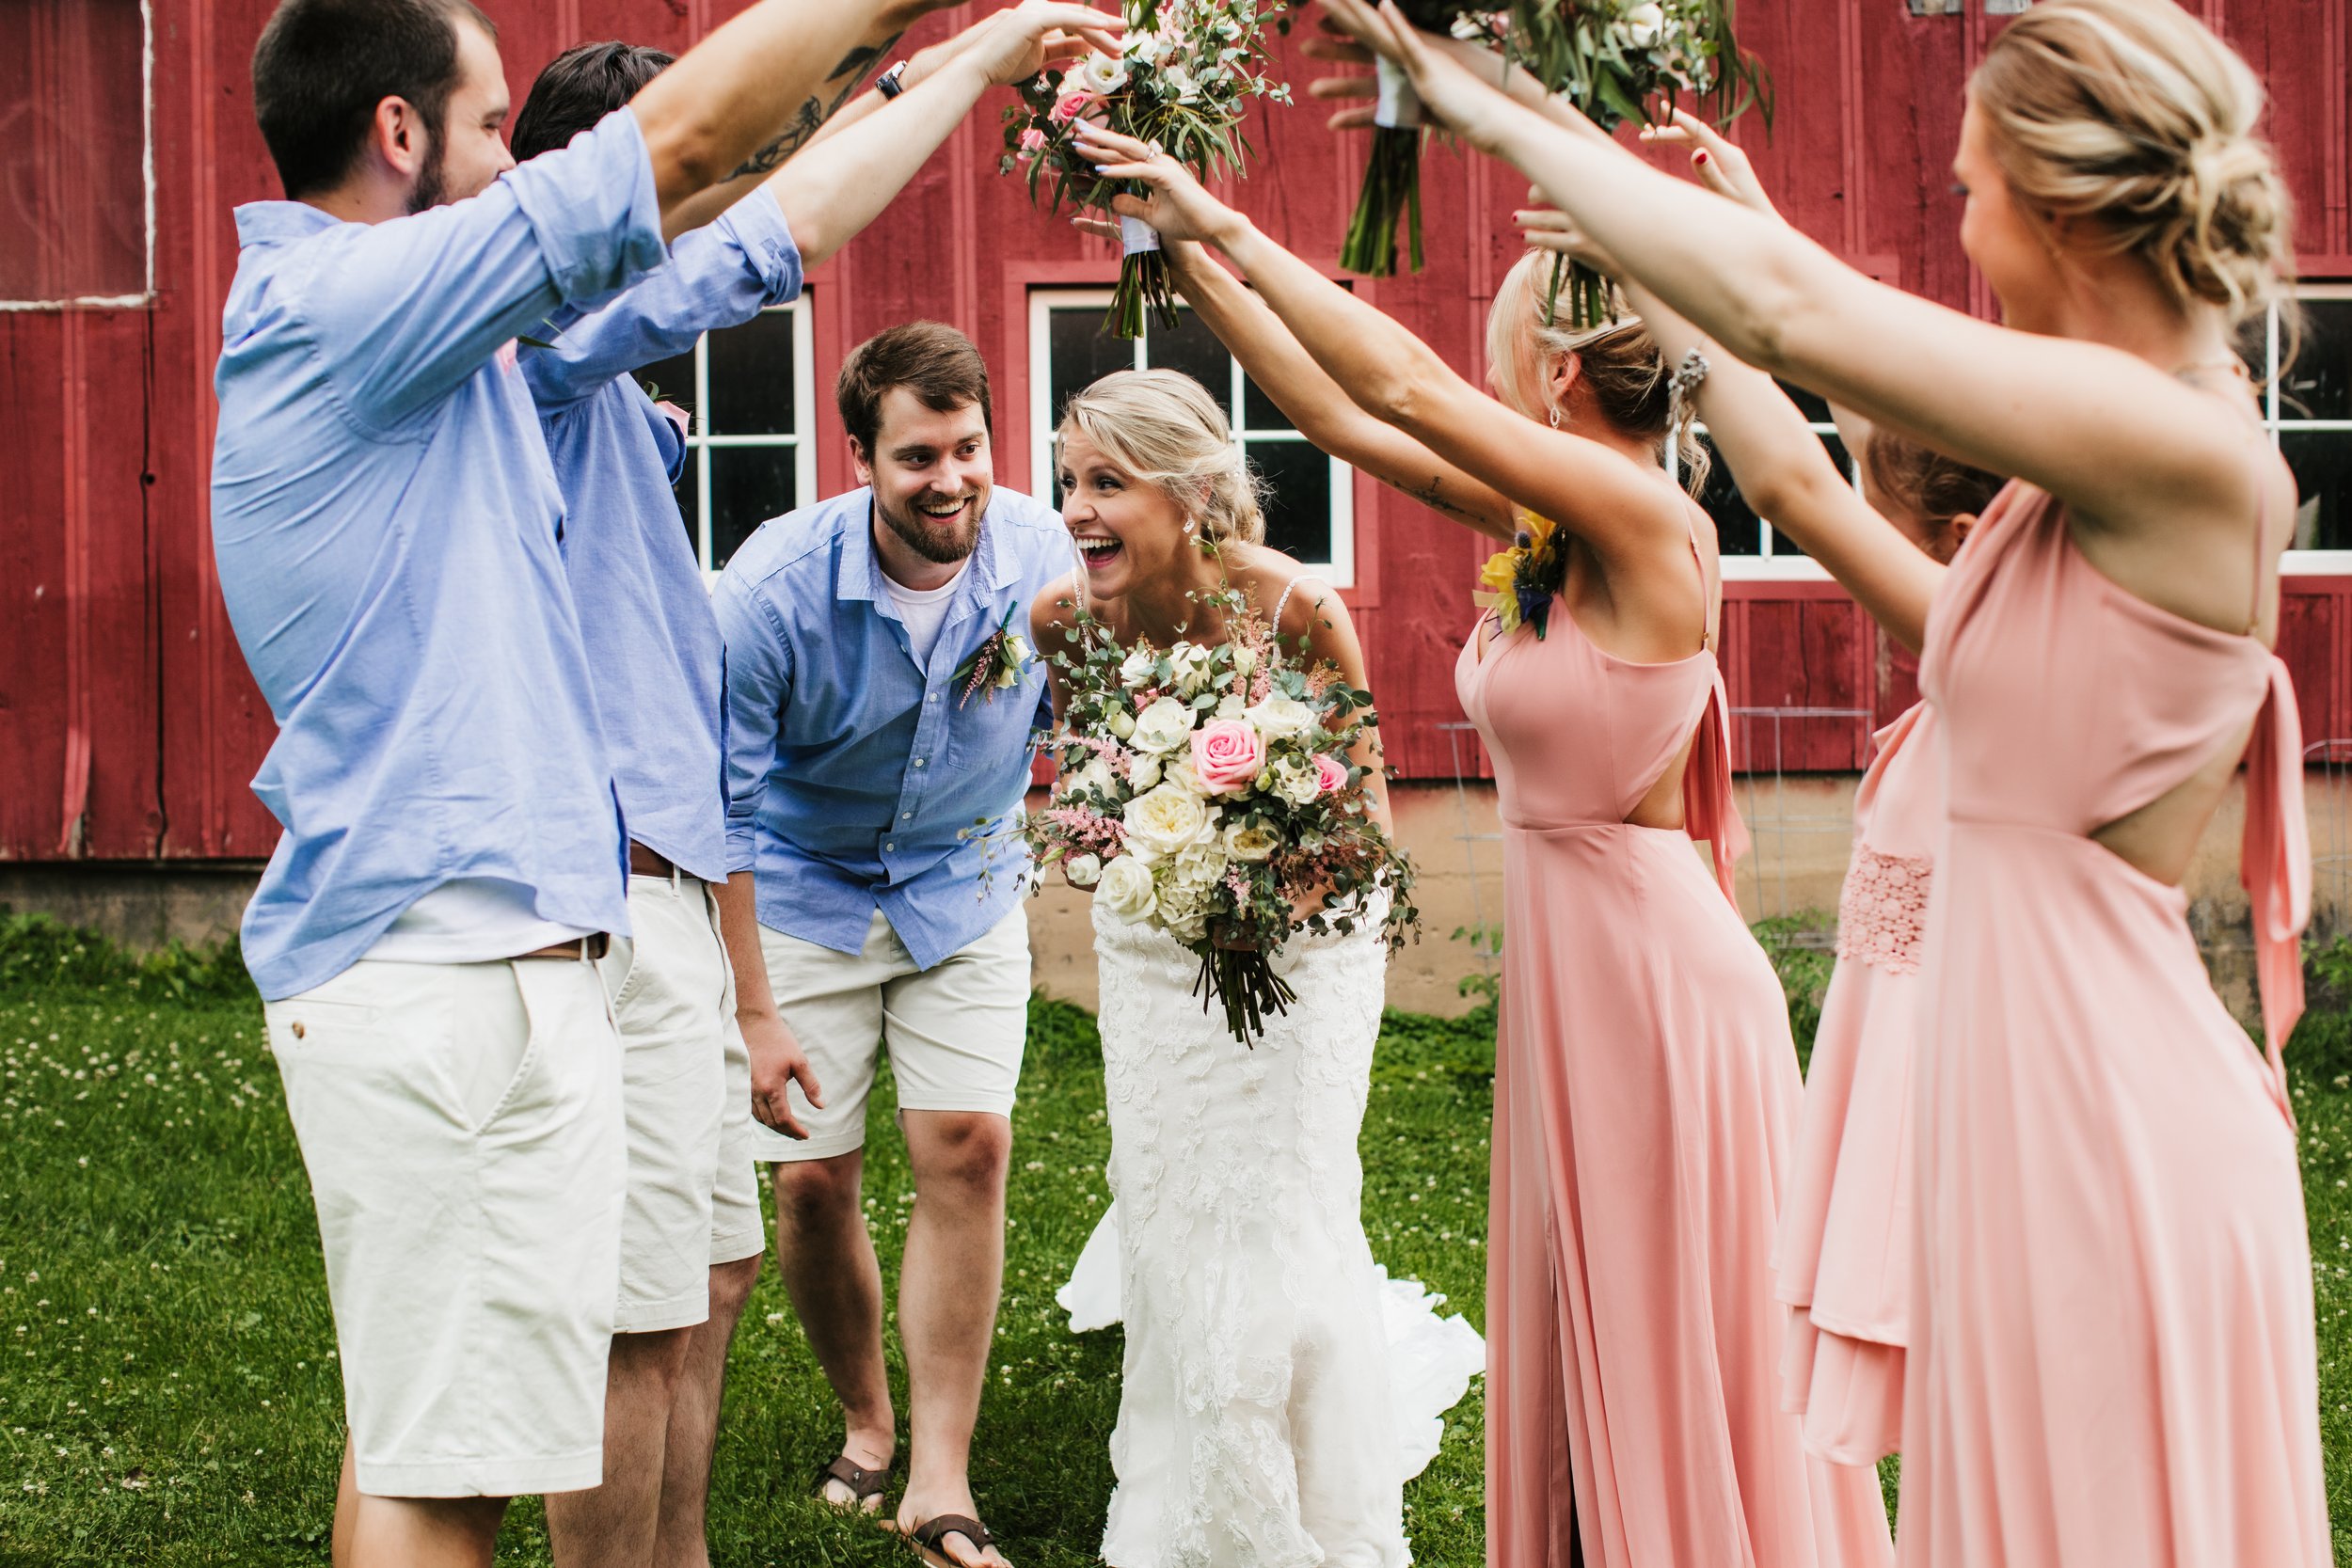  Wedding party in front of a red barn after a casual intimate wedding. groom wore shorts and flip flops bride wore lace dress roses pink bridesmaid dresses #TealaWardPhotography #illinoisphotographer #princetonillinois #weddingphotographer #intimatew